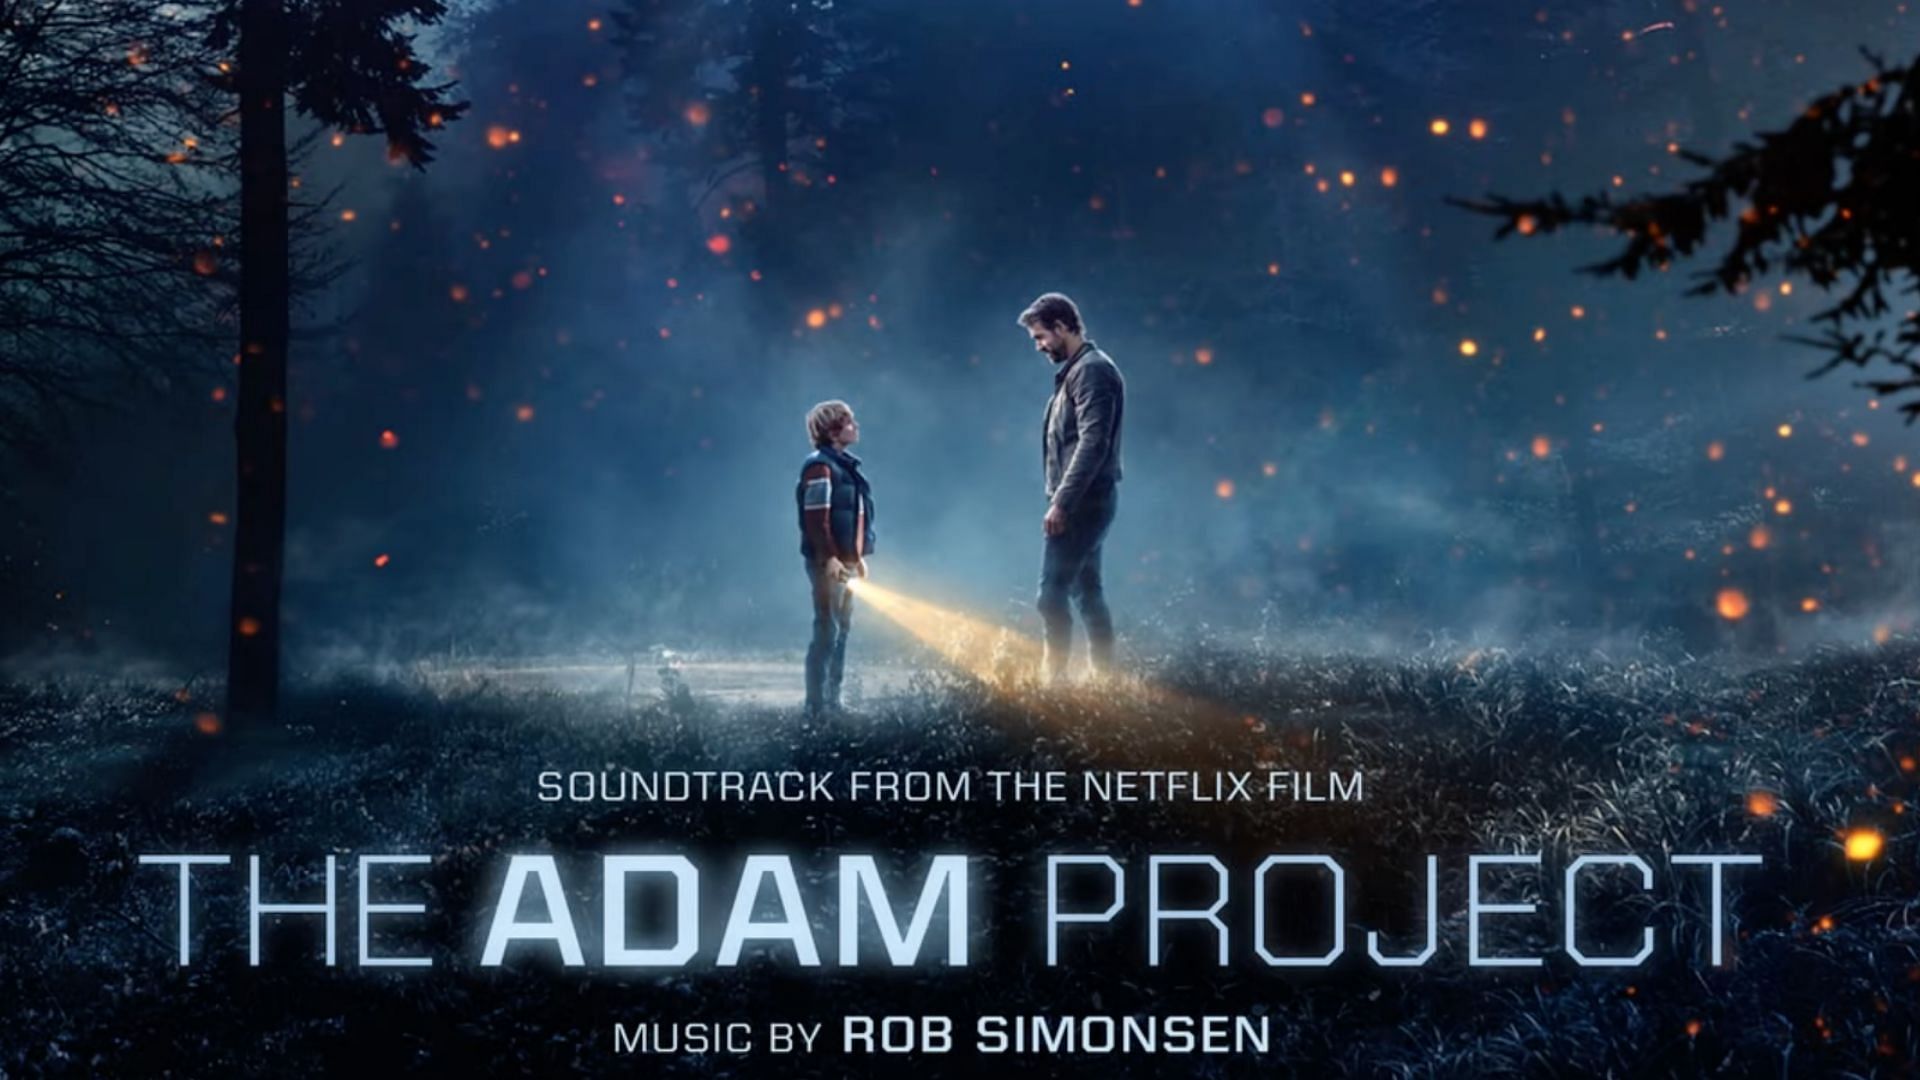 The game played in 'The Adam Project' was an actual playable piece